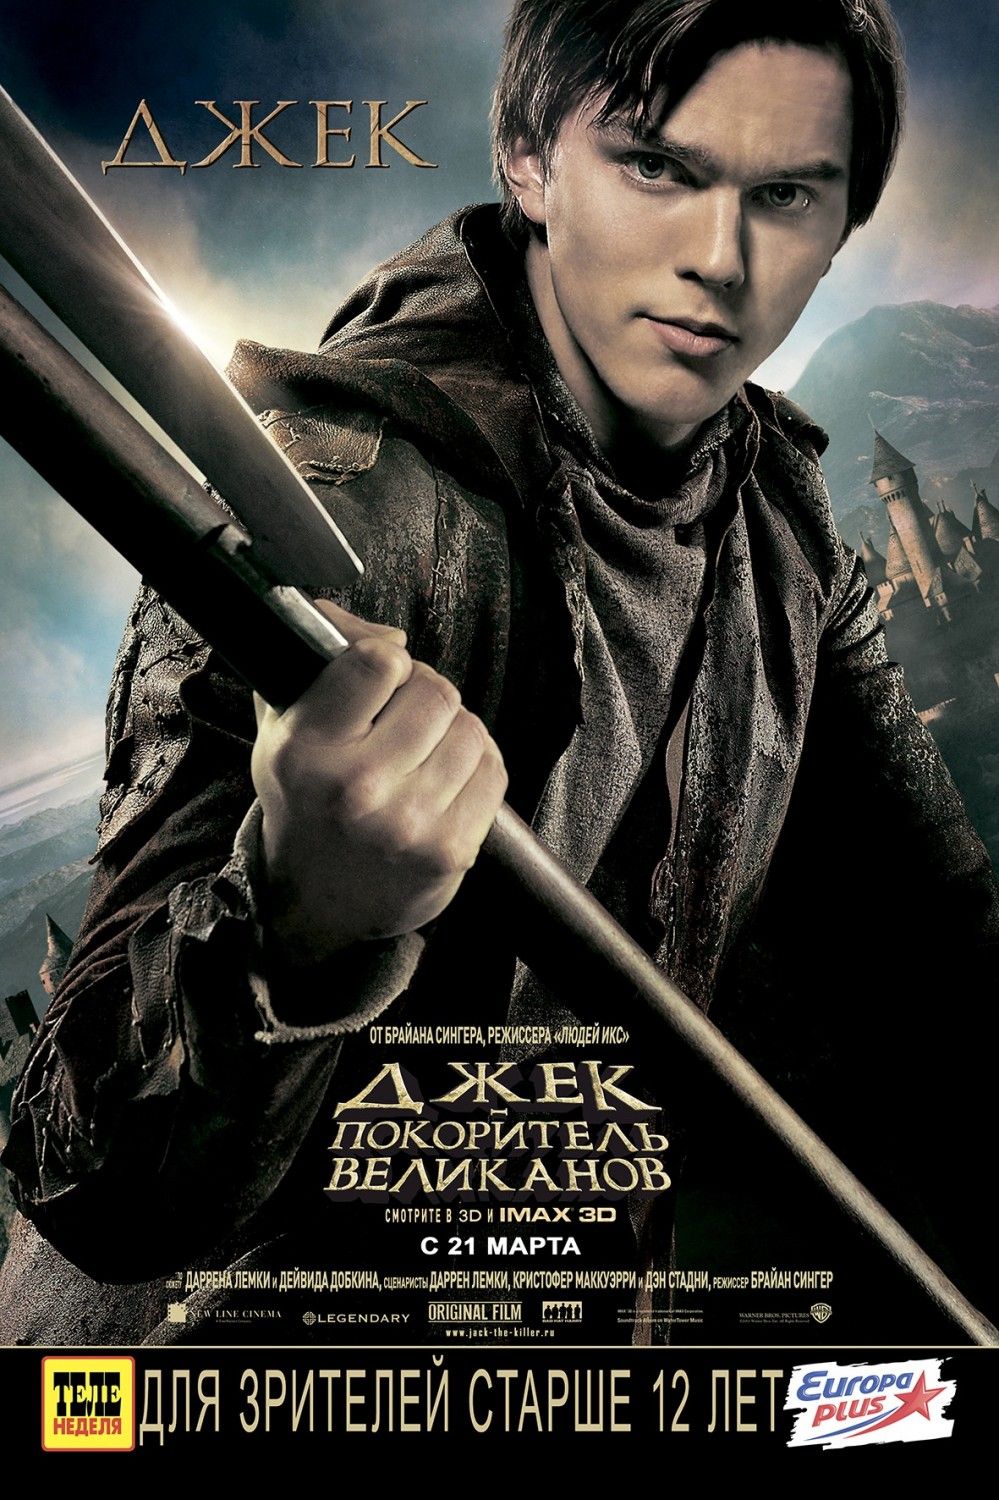 Jack the Giant Slayer Nicholas Hoult Character Poster